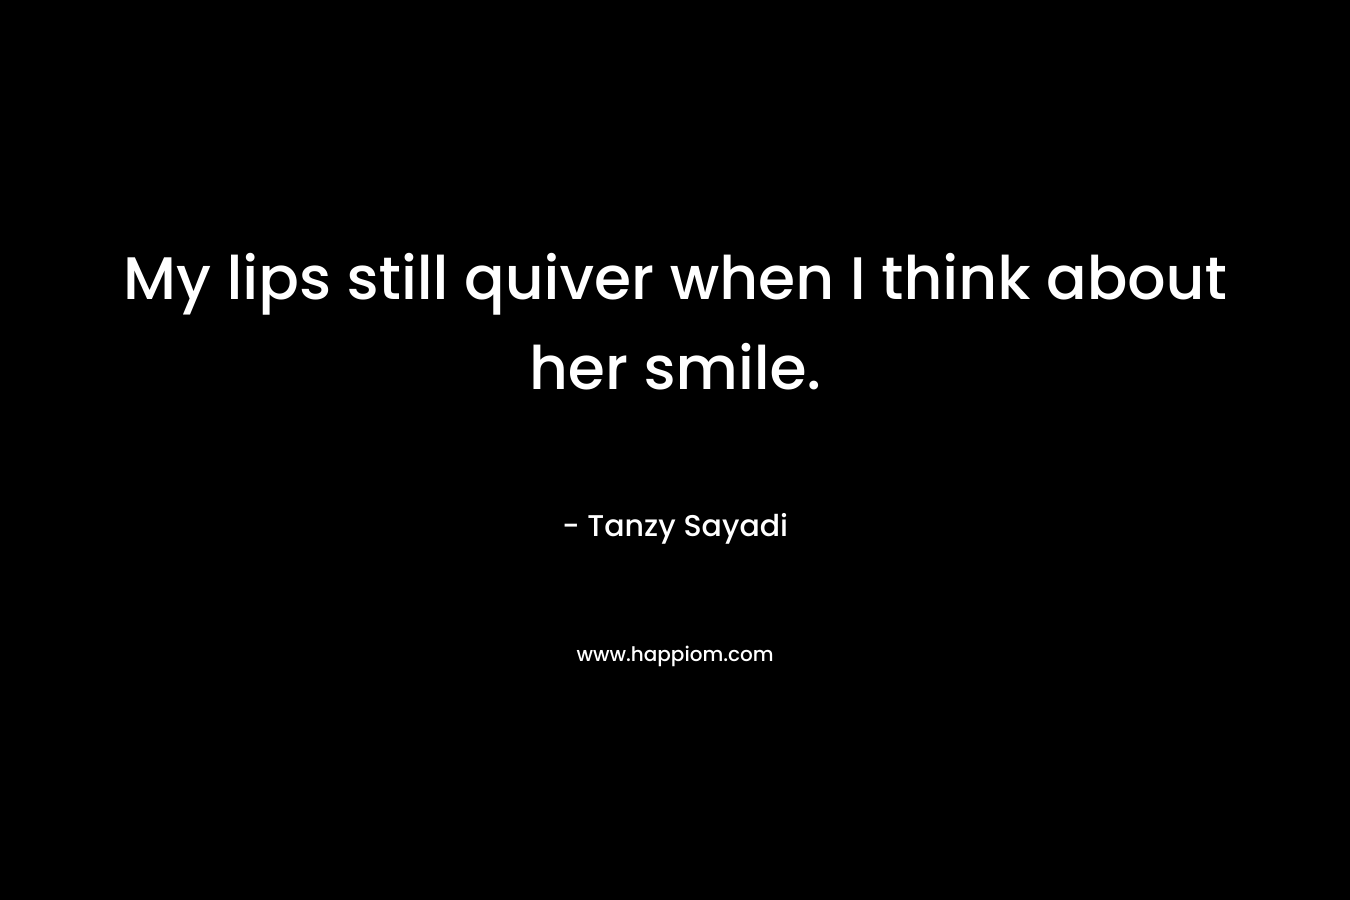 My lips still quiver when I think about her smile.